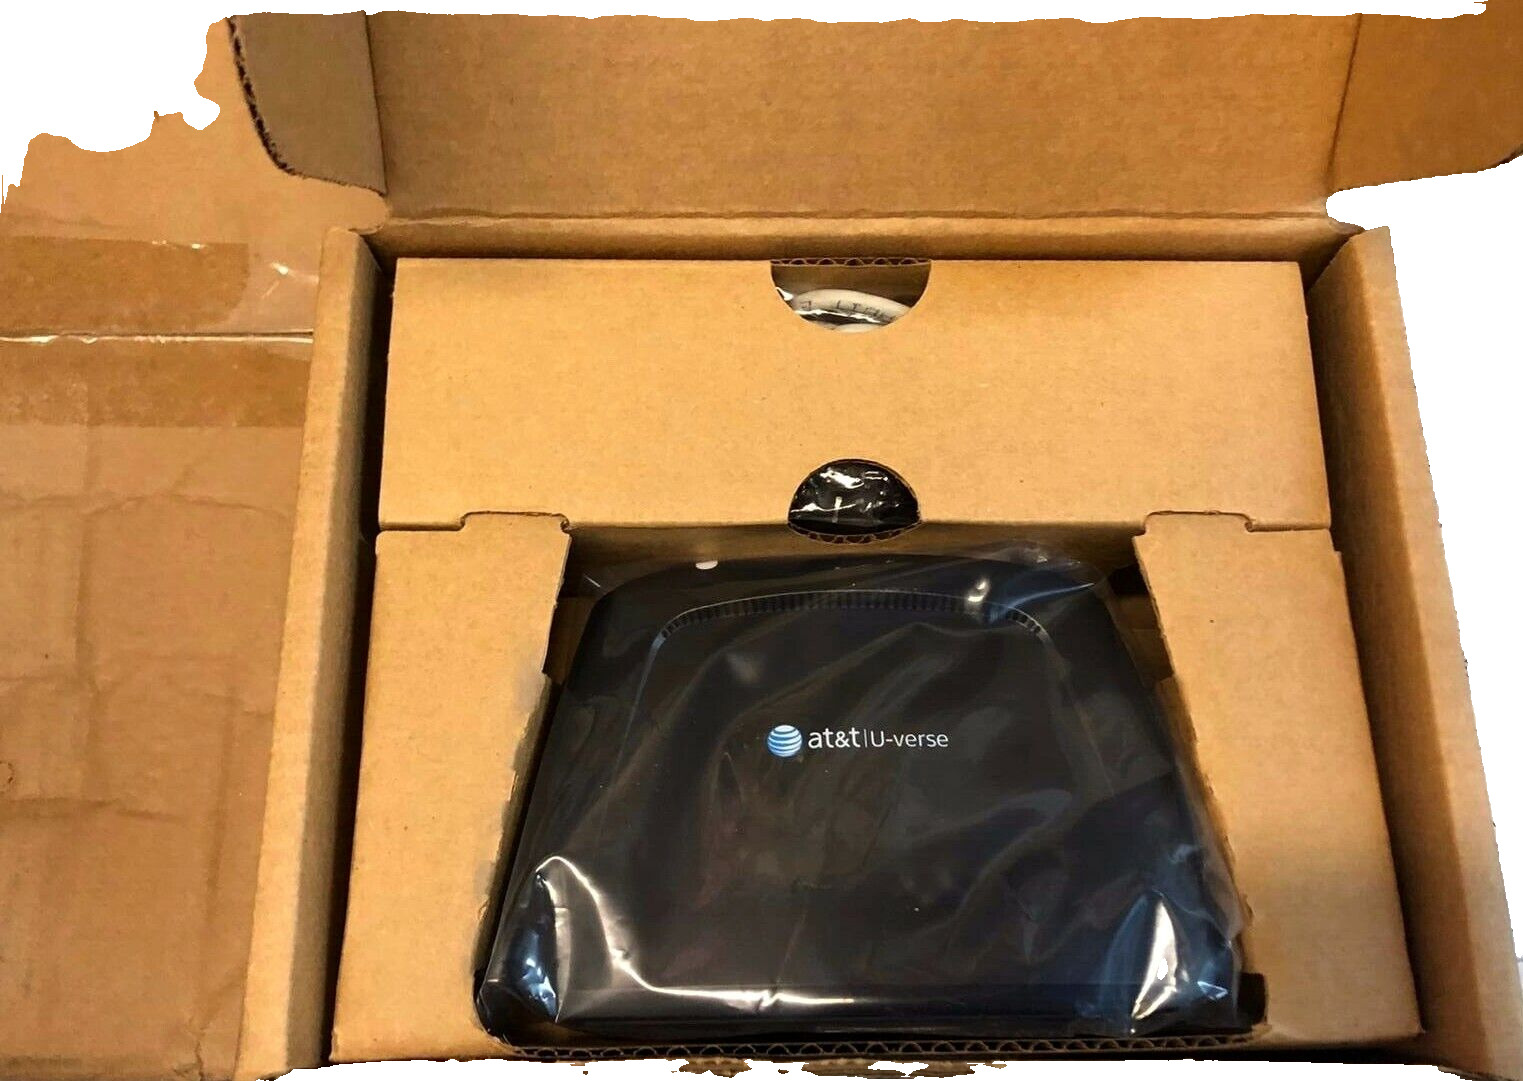 Cisco VEN401-AT Wireless Access Point WAP 4042812 Router AT&T U-verse - NEW KIT